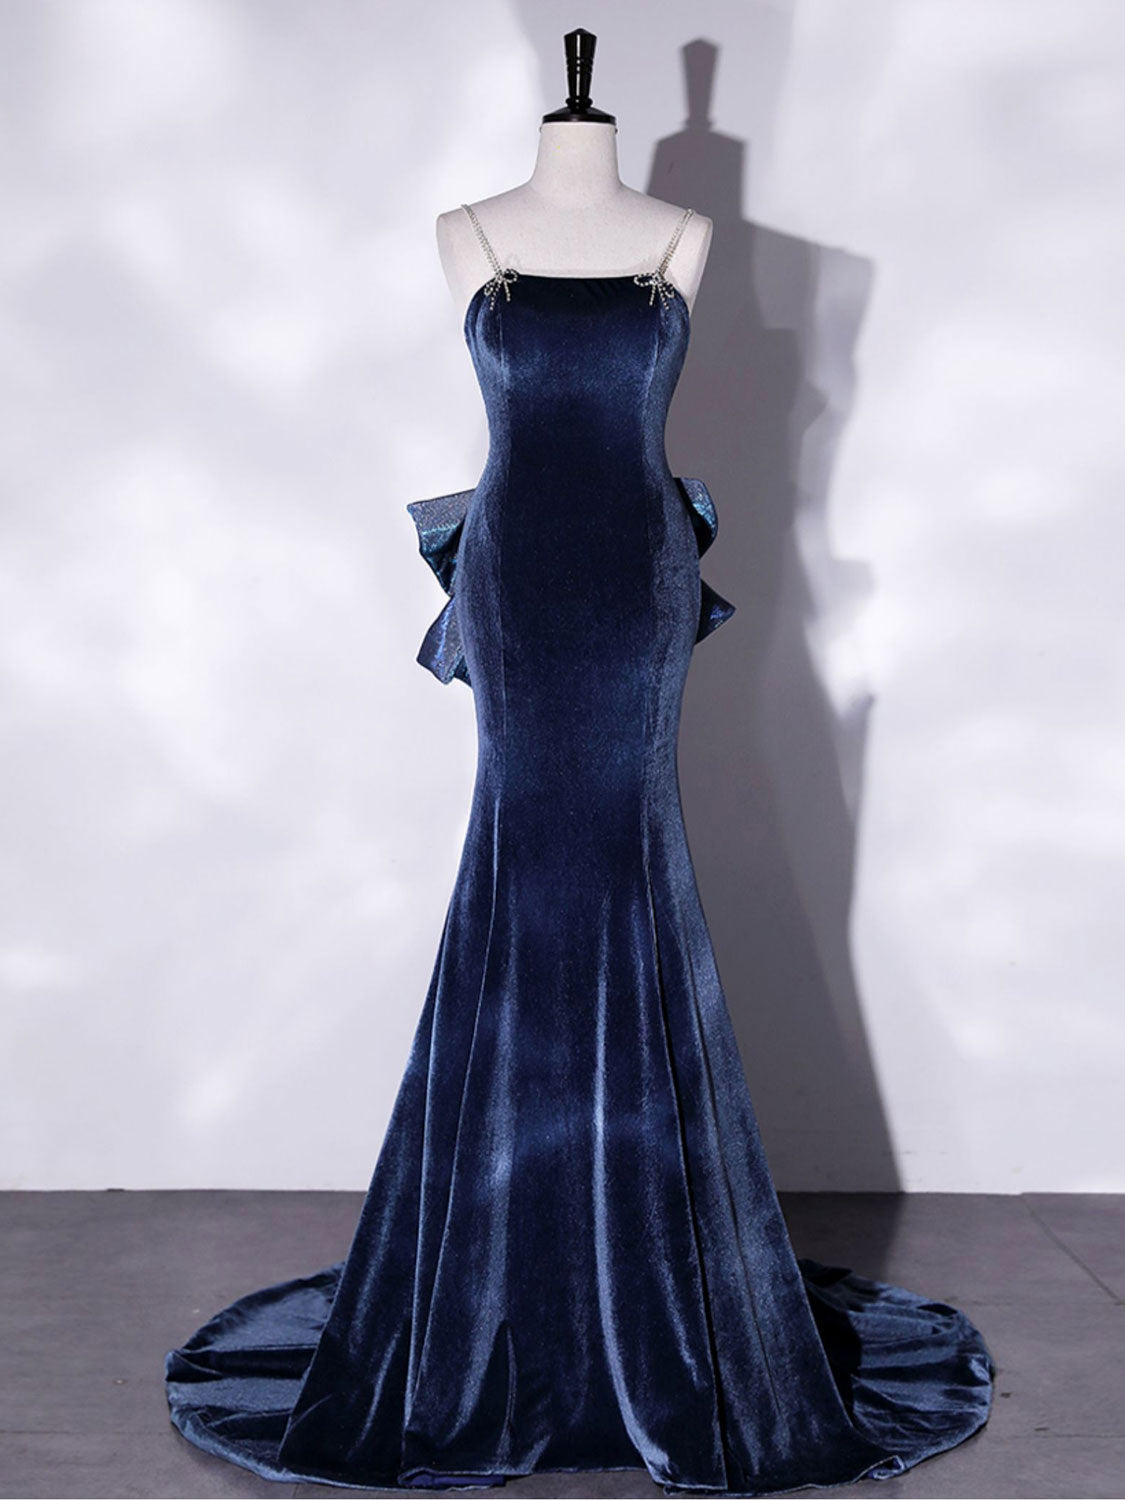 Spaghetti Strap Blue Velvet Mermaid Prom Dress with Big Bow Back - DollyGown